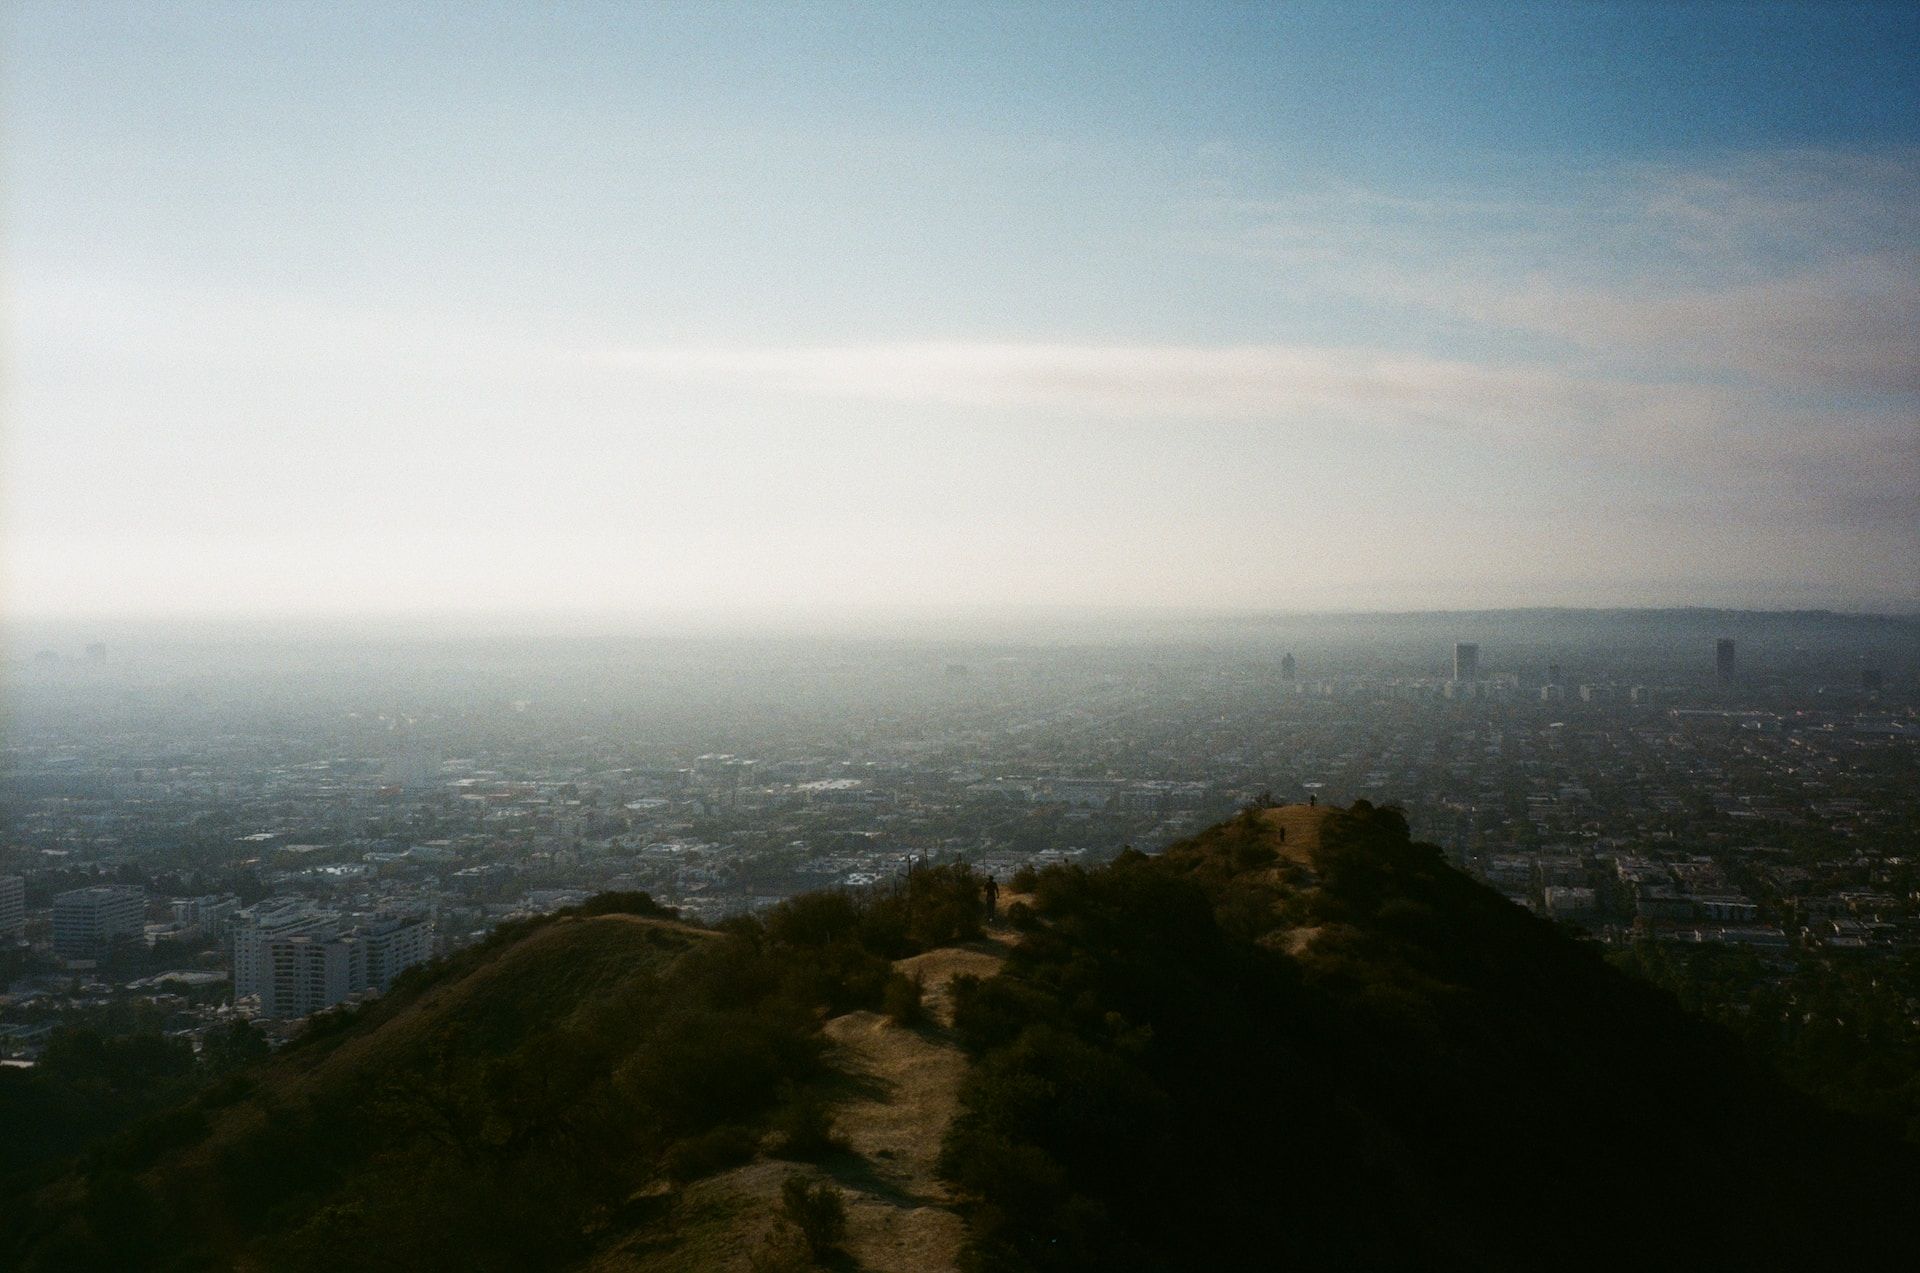 Runyon Canyon Park in Los Angeles